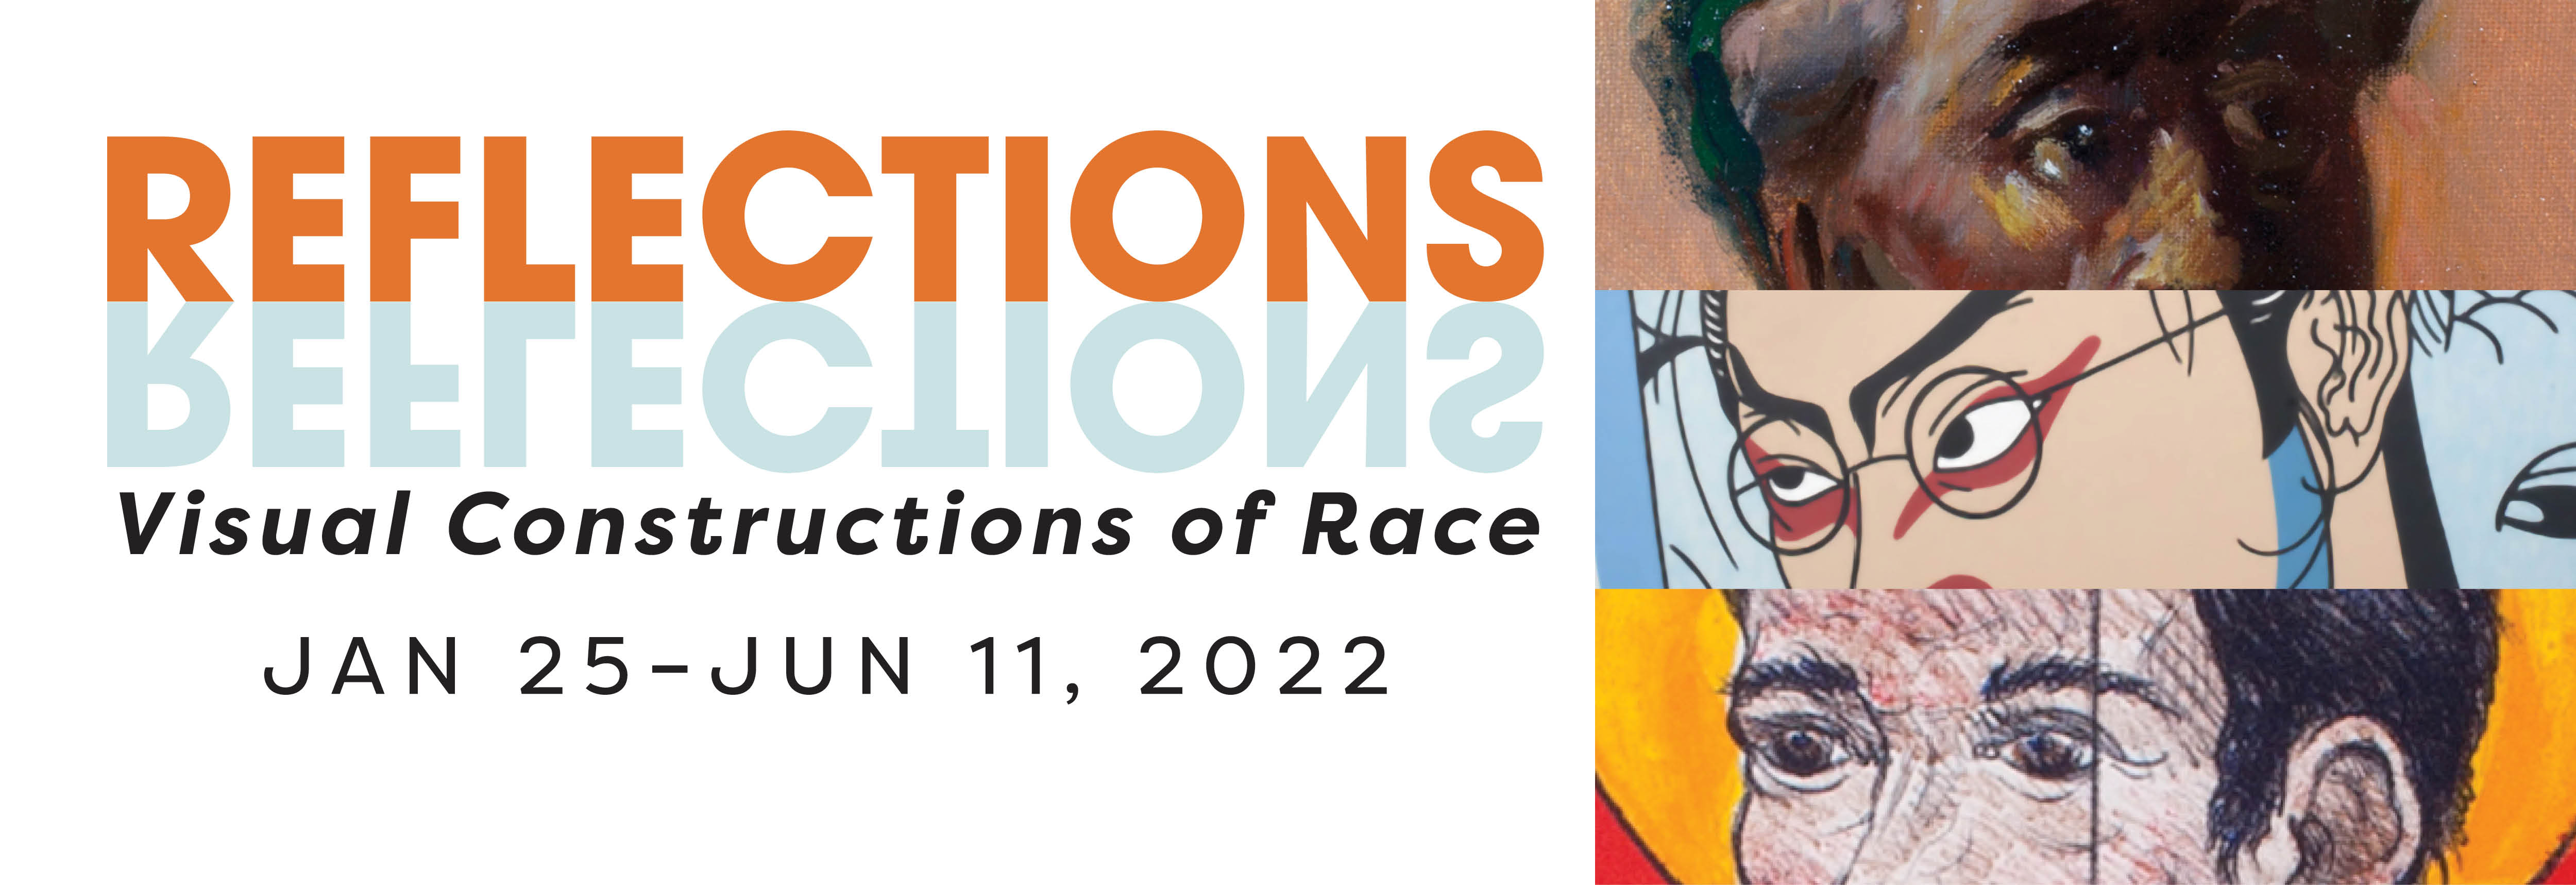 Reflections: Visual Constructions of Race